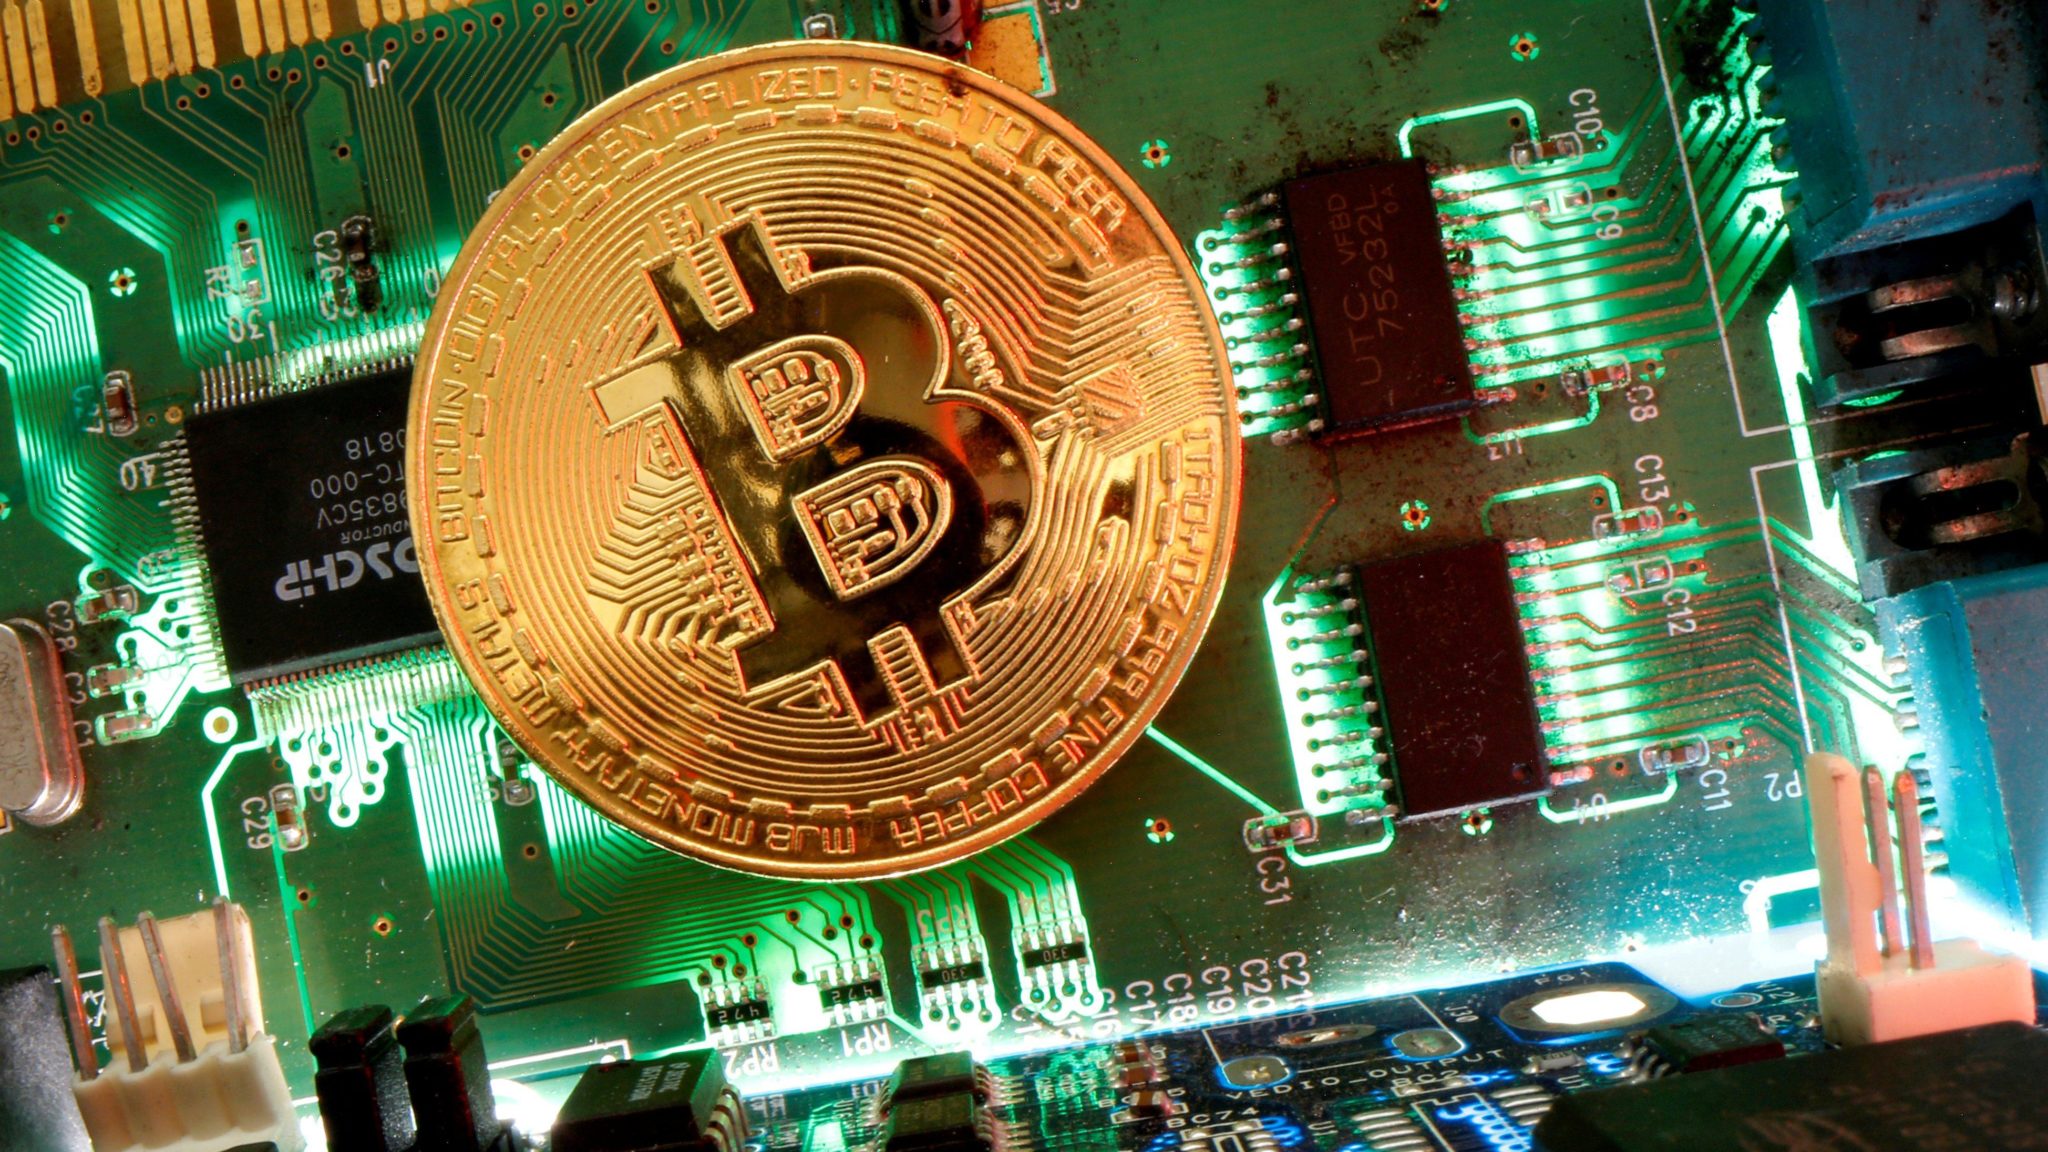 China’s crackdown on bitcoin mining is getting real - Techio